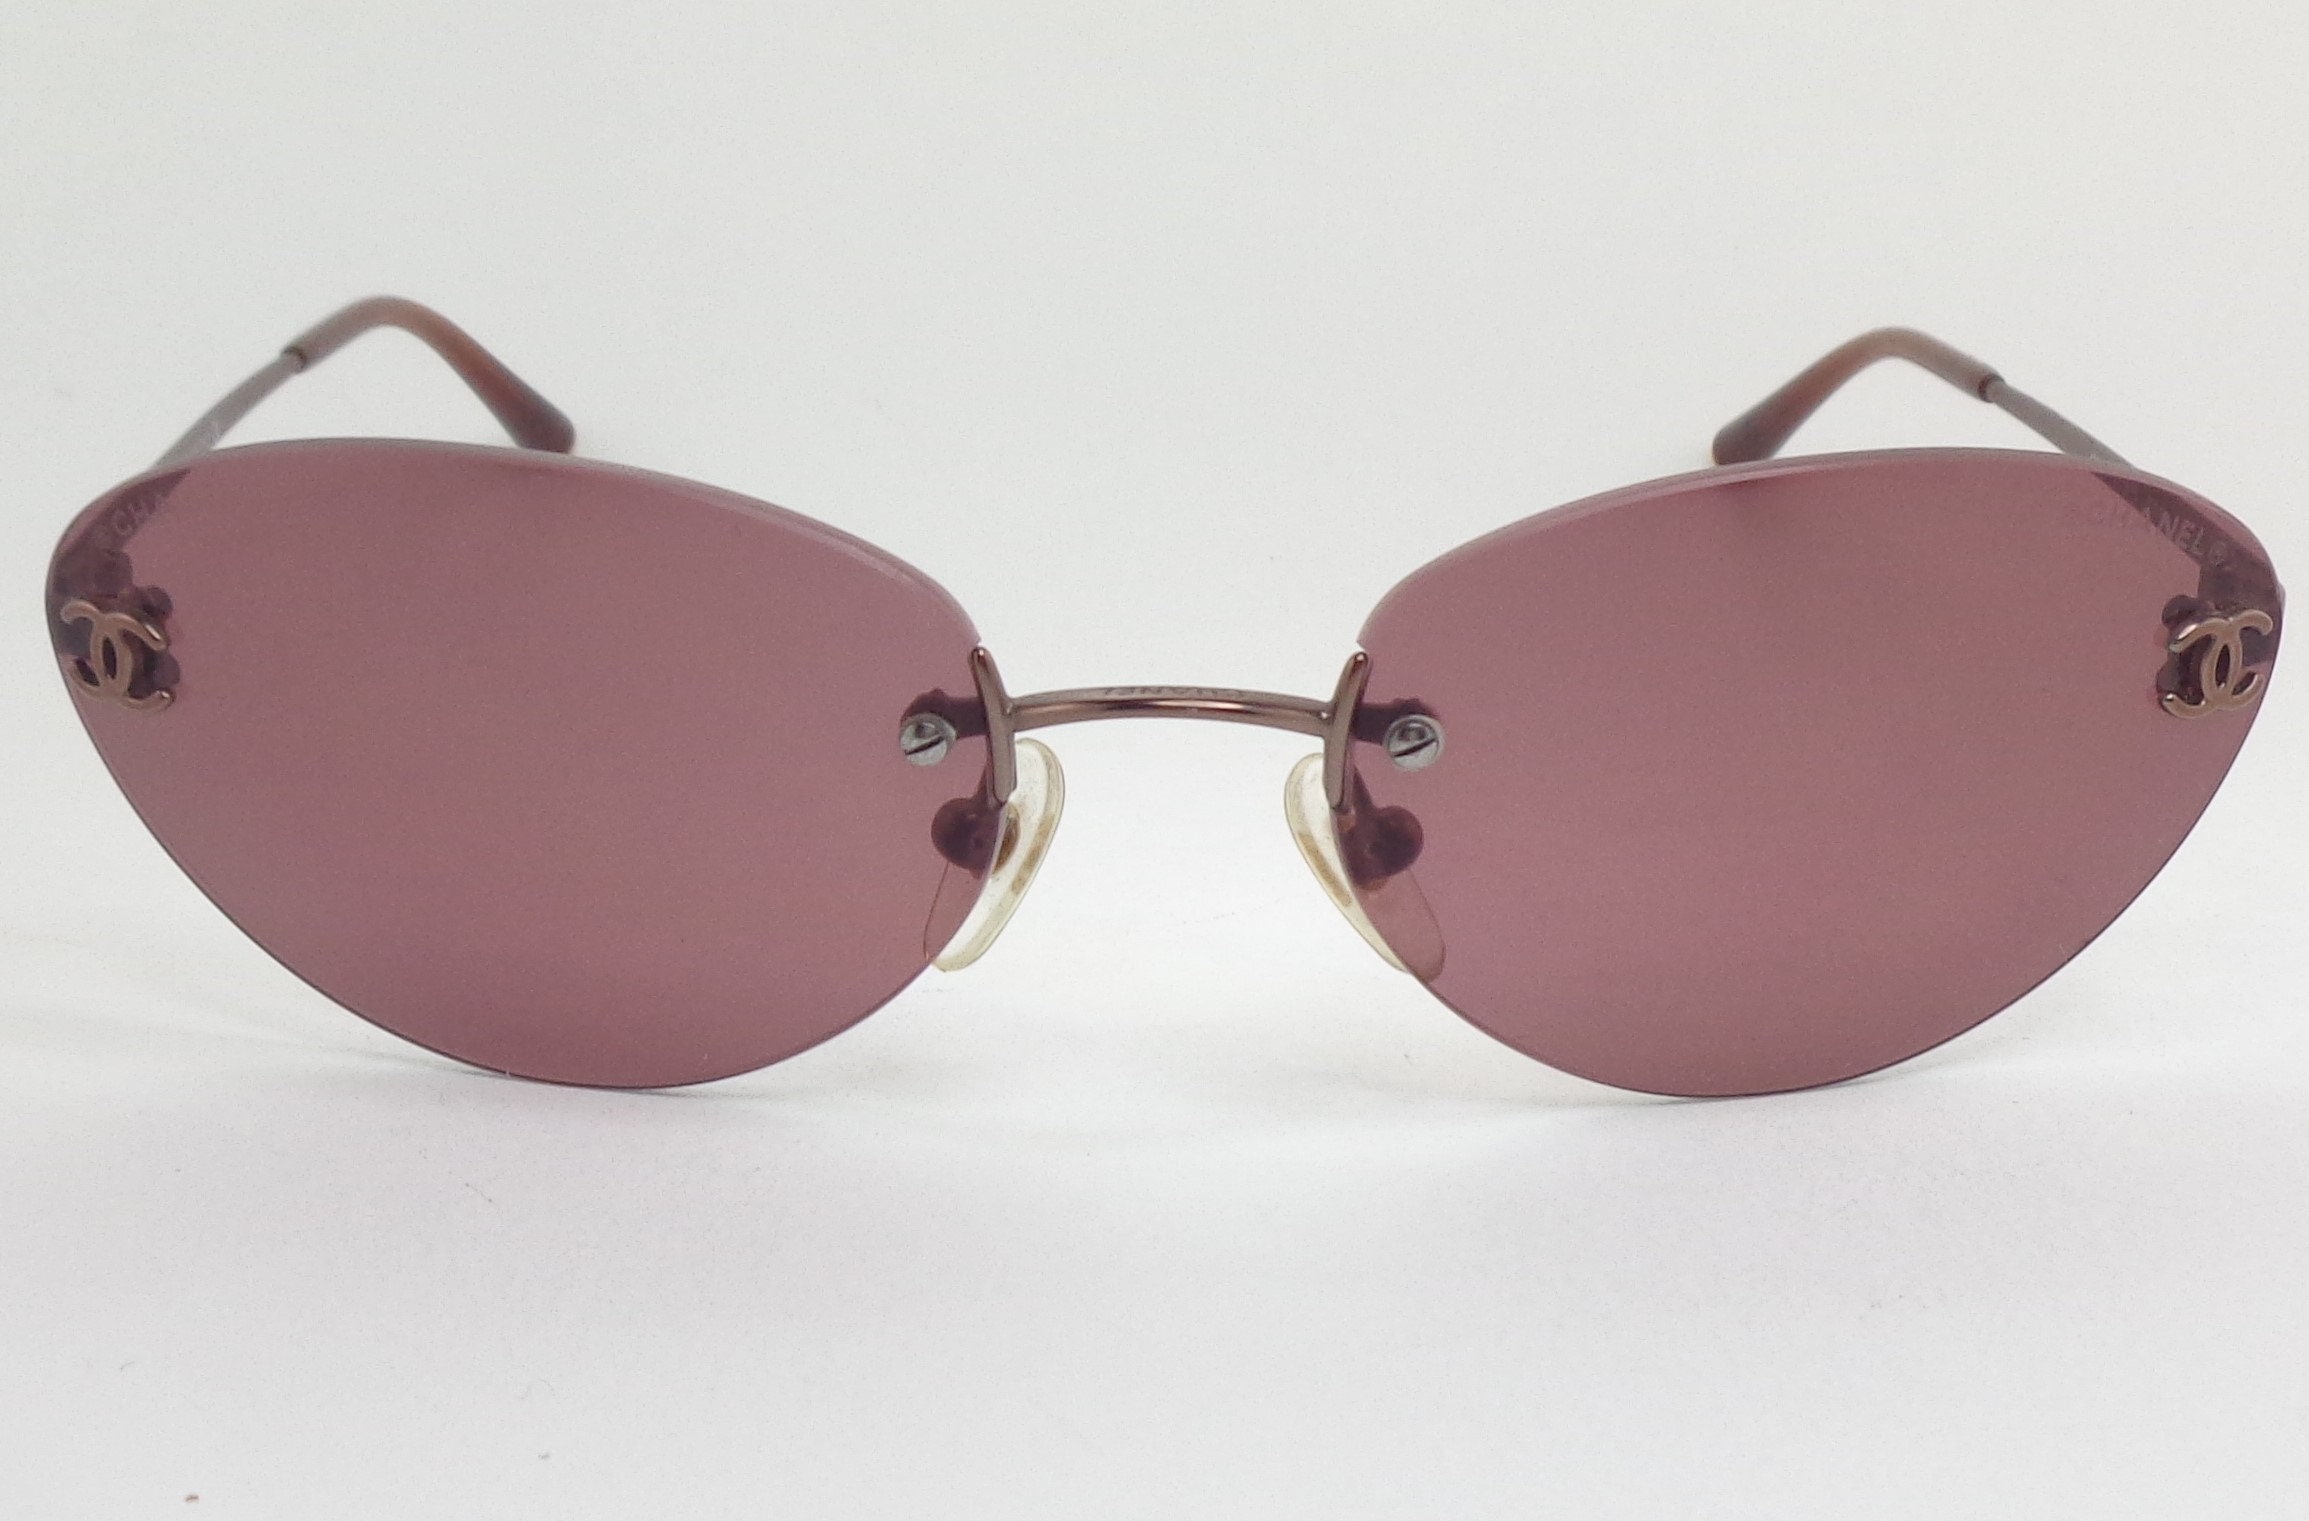 Chanel 4003 Vintage Sunglasses Made in Italy -  Finland